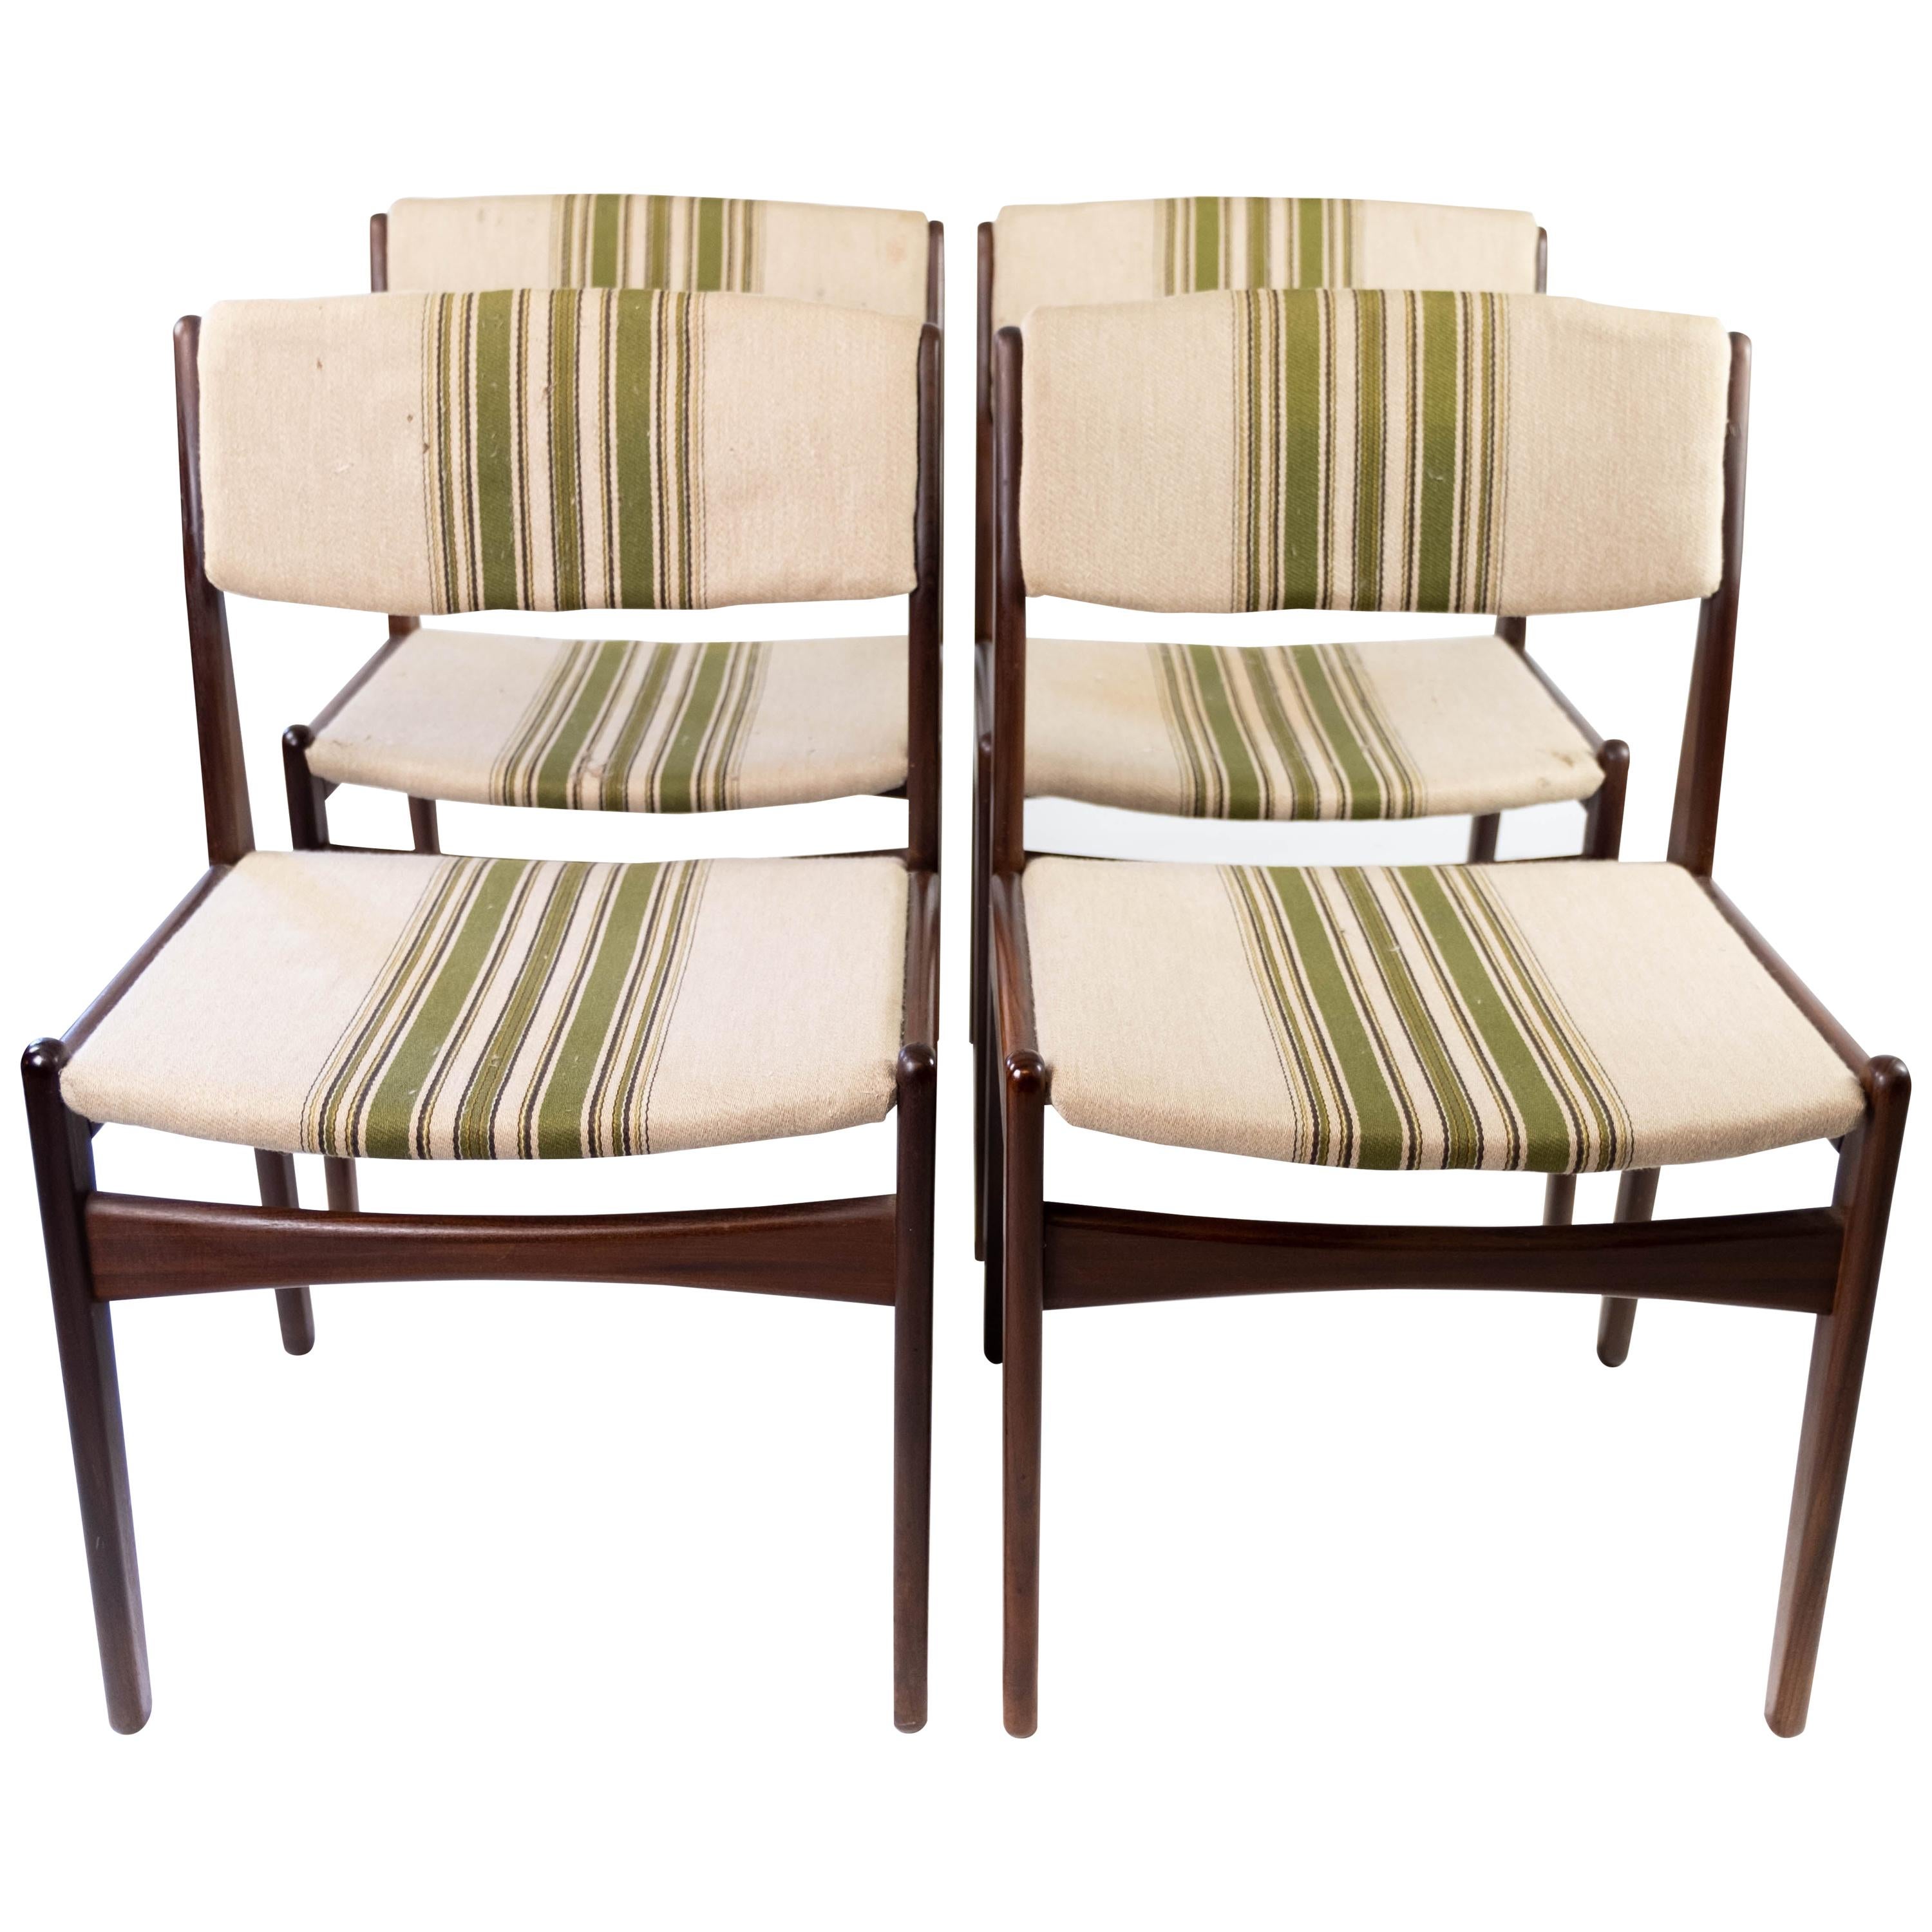 Set of Four Dining Room Chairs in Teak by Erik Buch, 1960